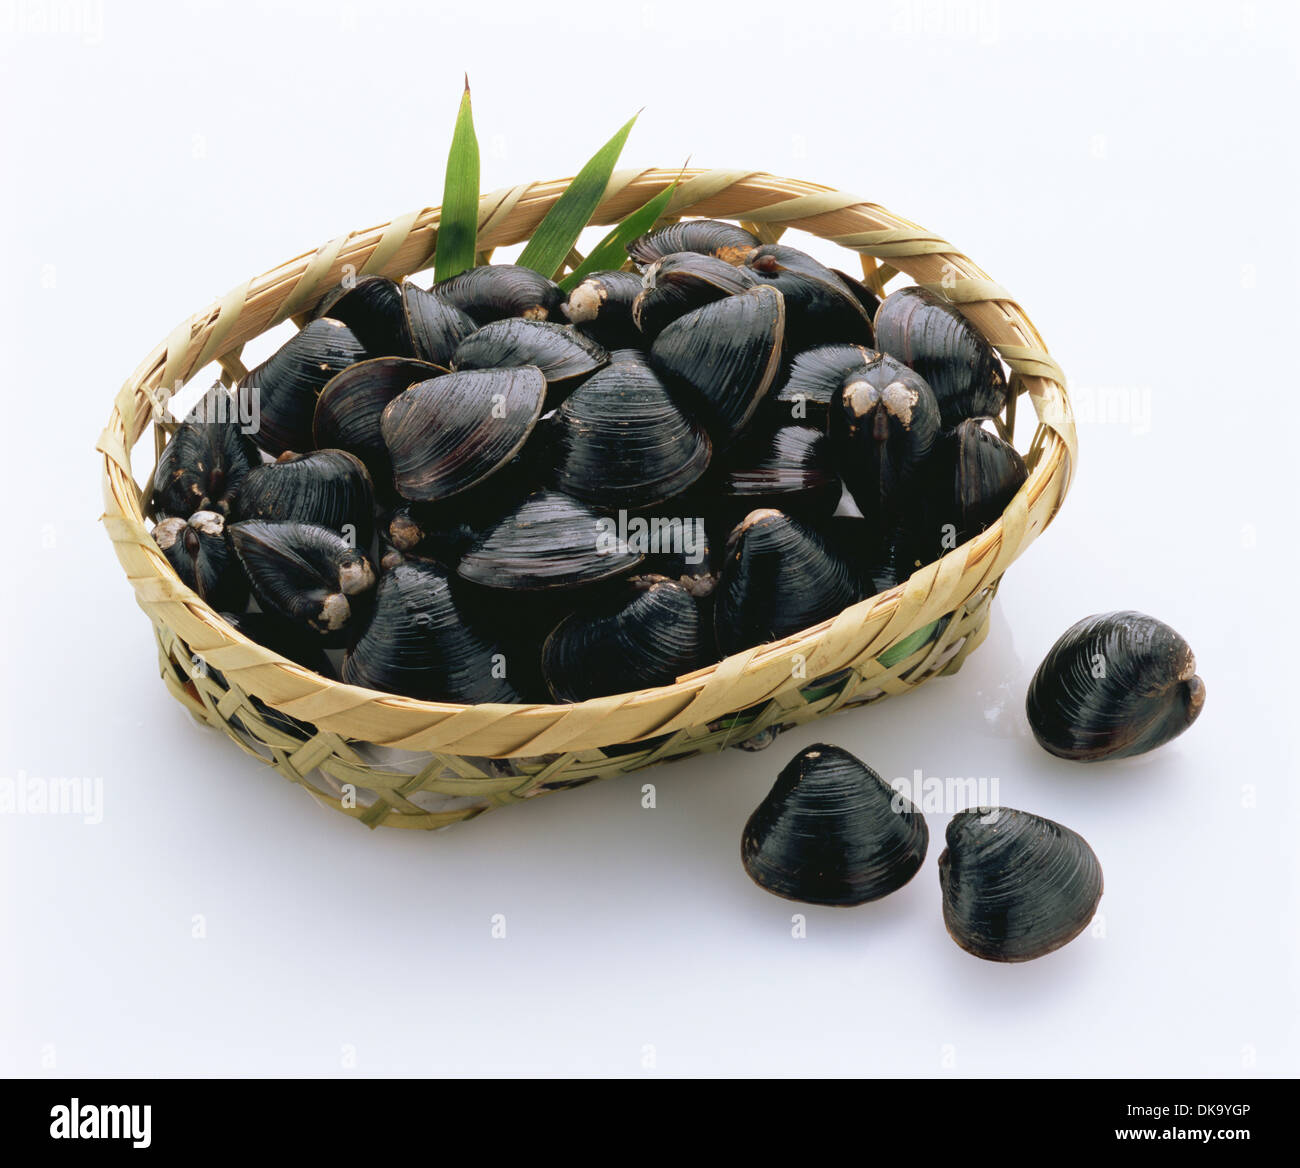 Freshwater clams Stock Photo